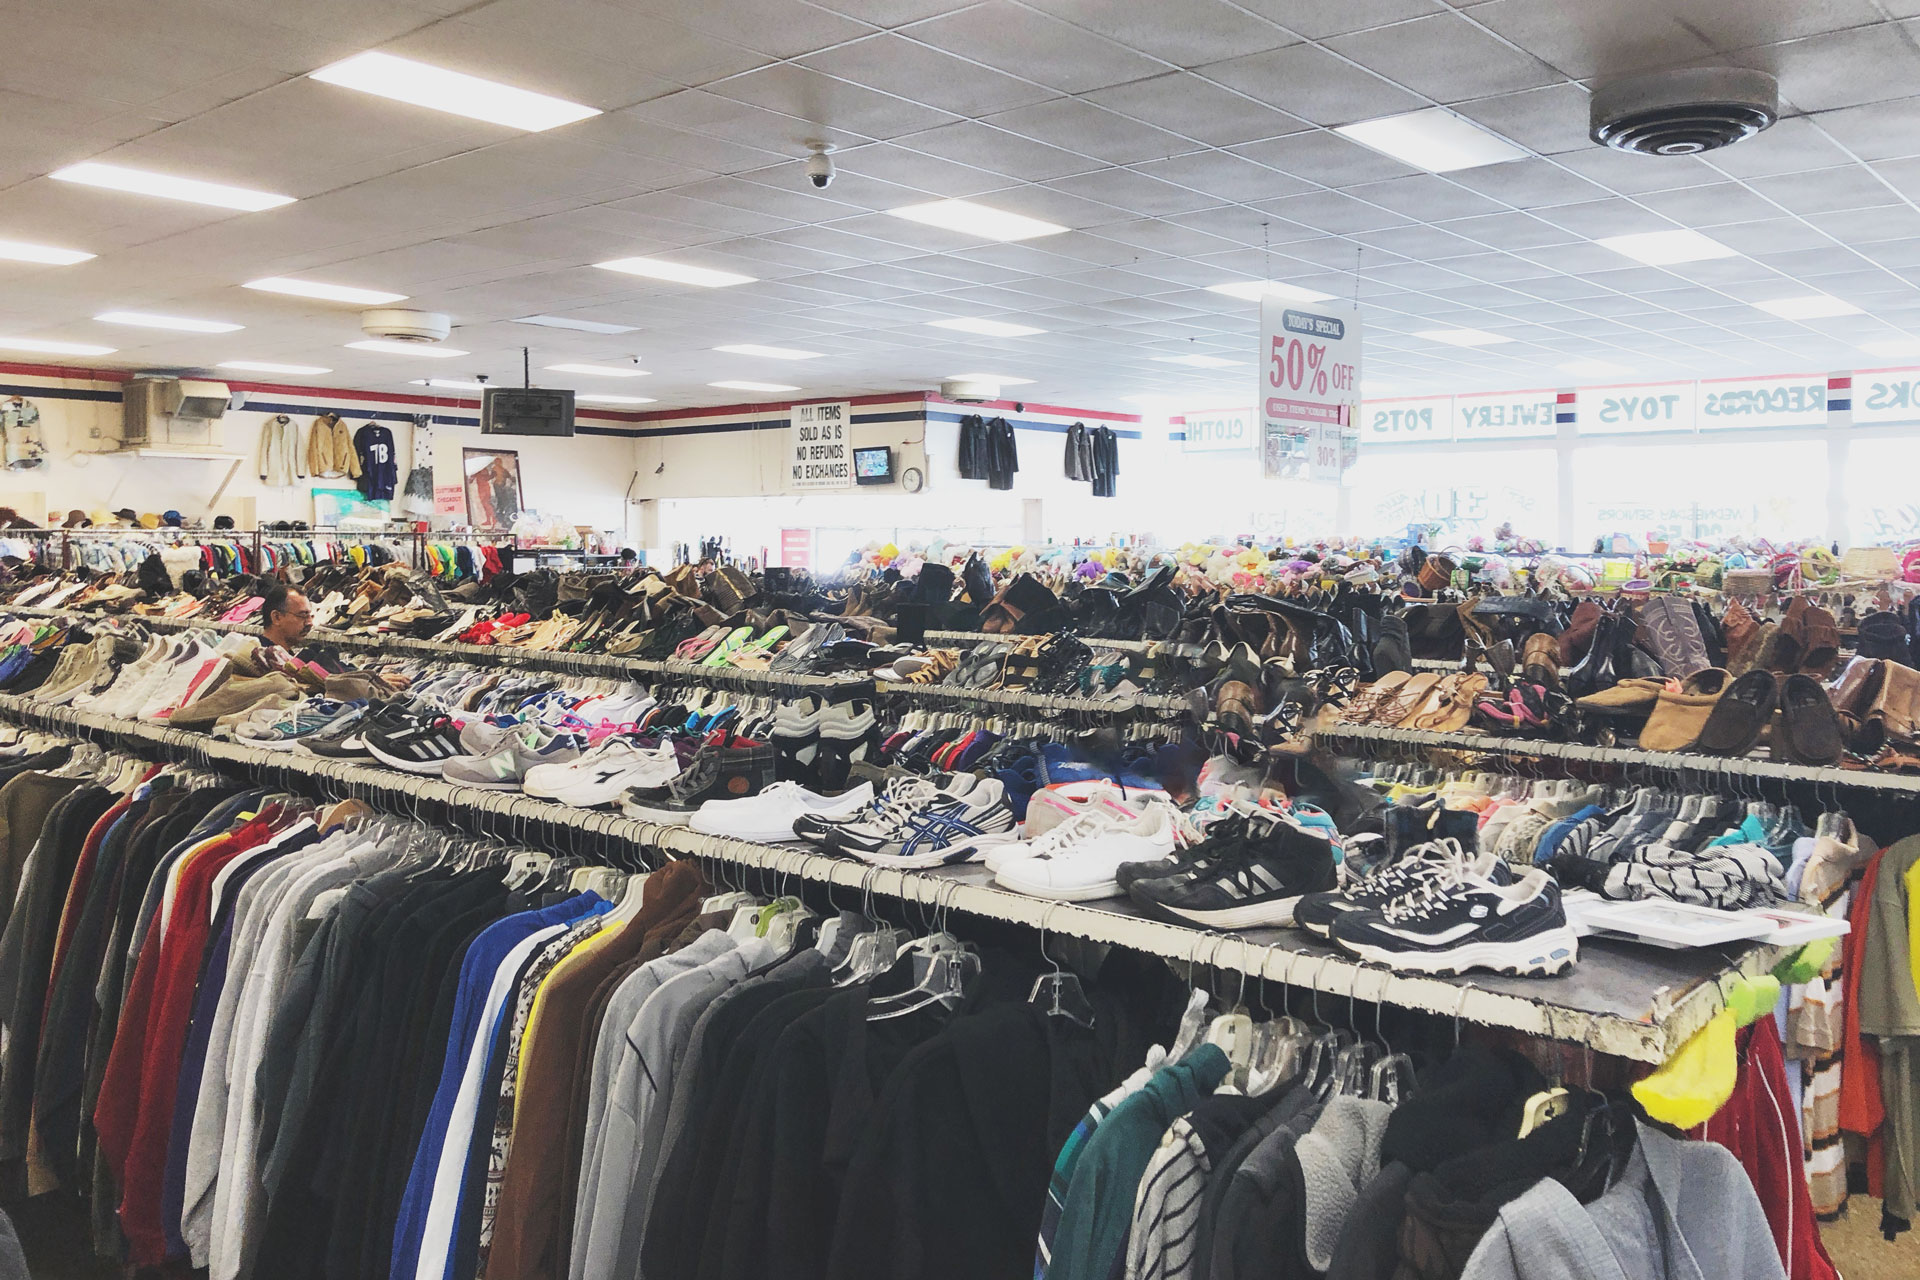 secondhand shopping, burbank, los angeles, thrift stores, thrift shops, secondhand shops, vintage